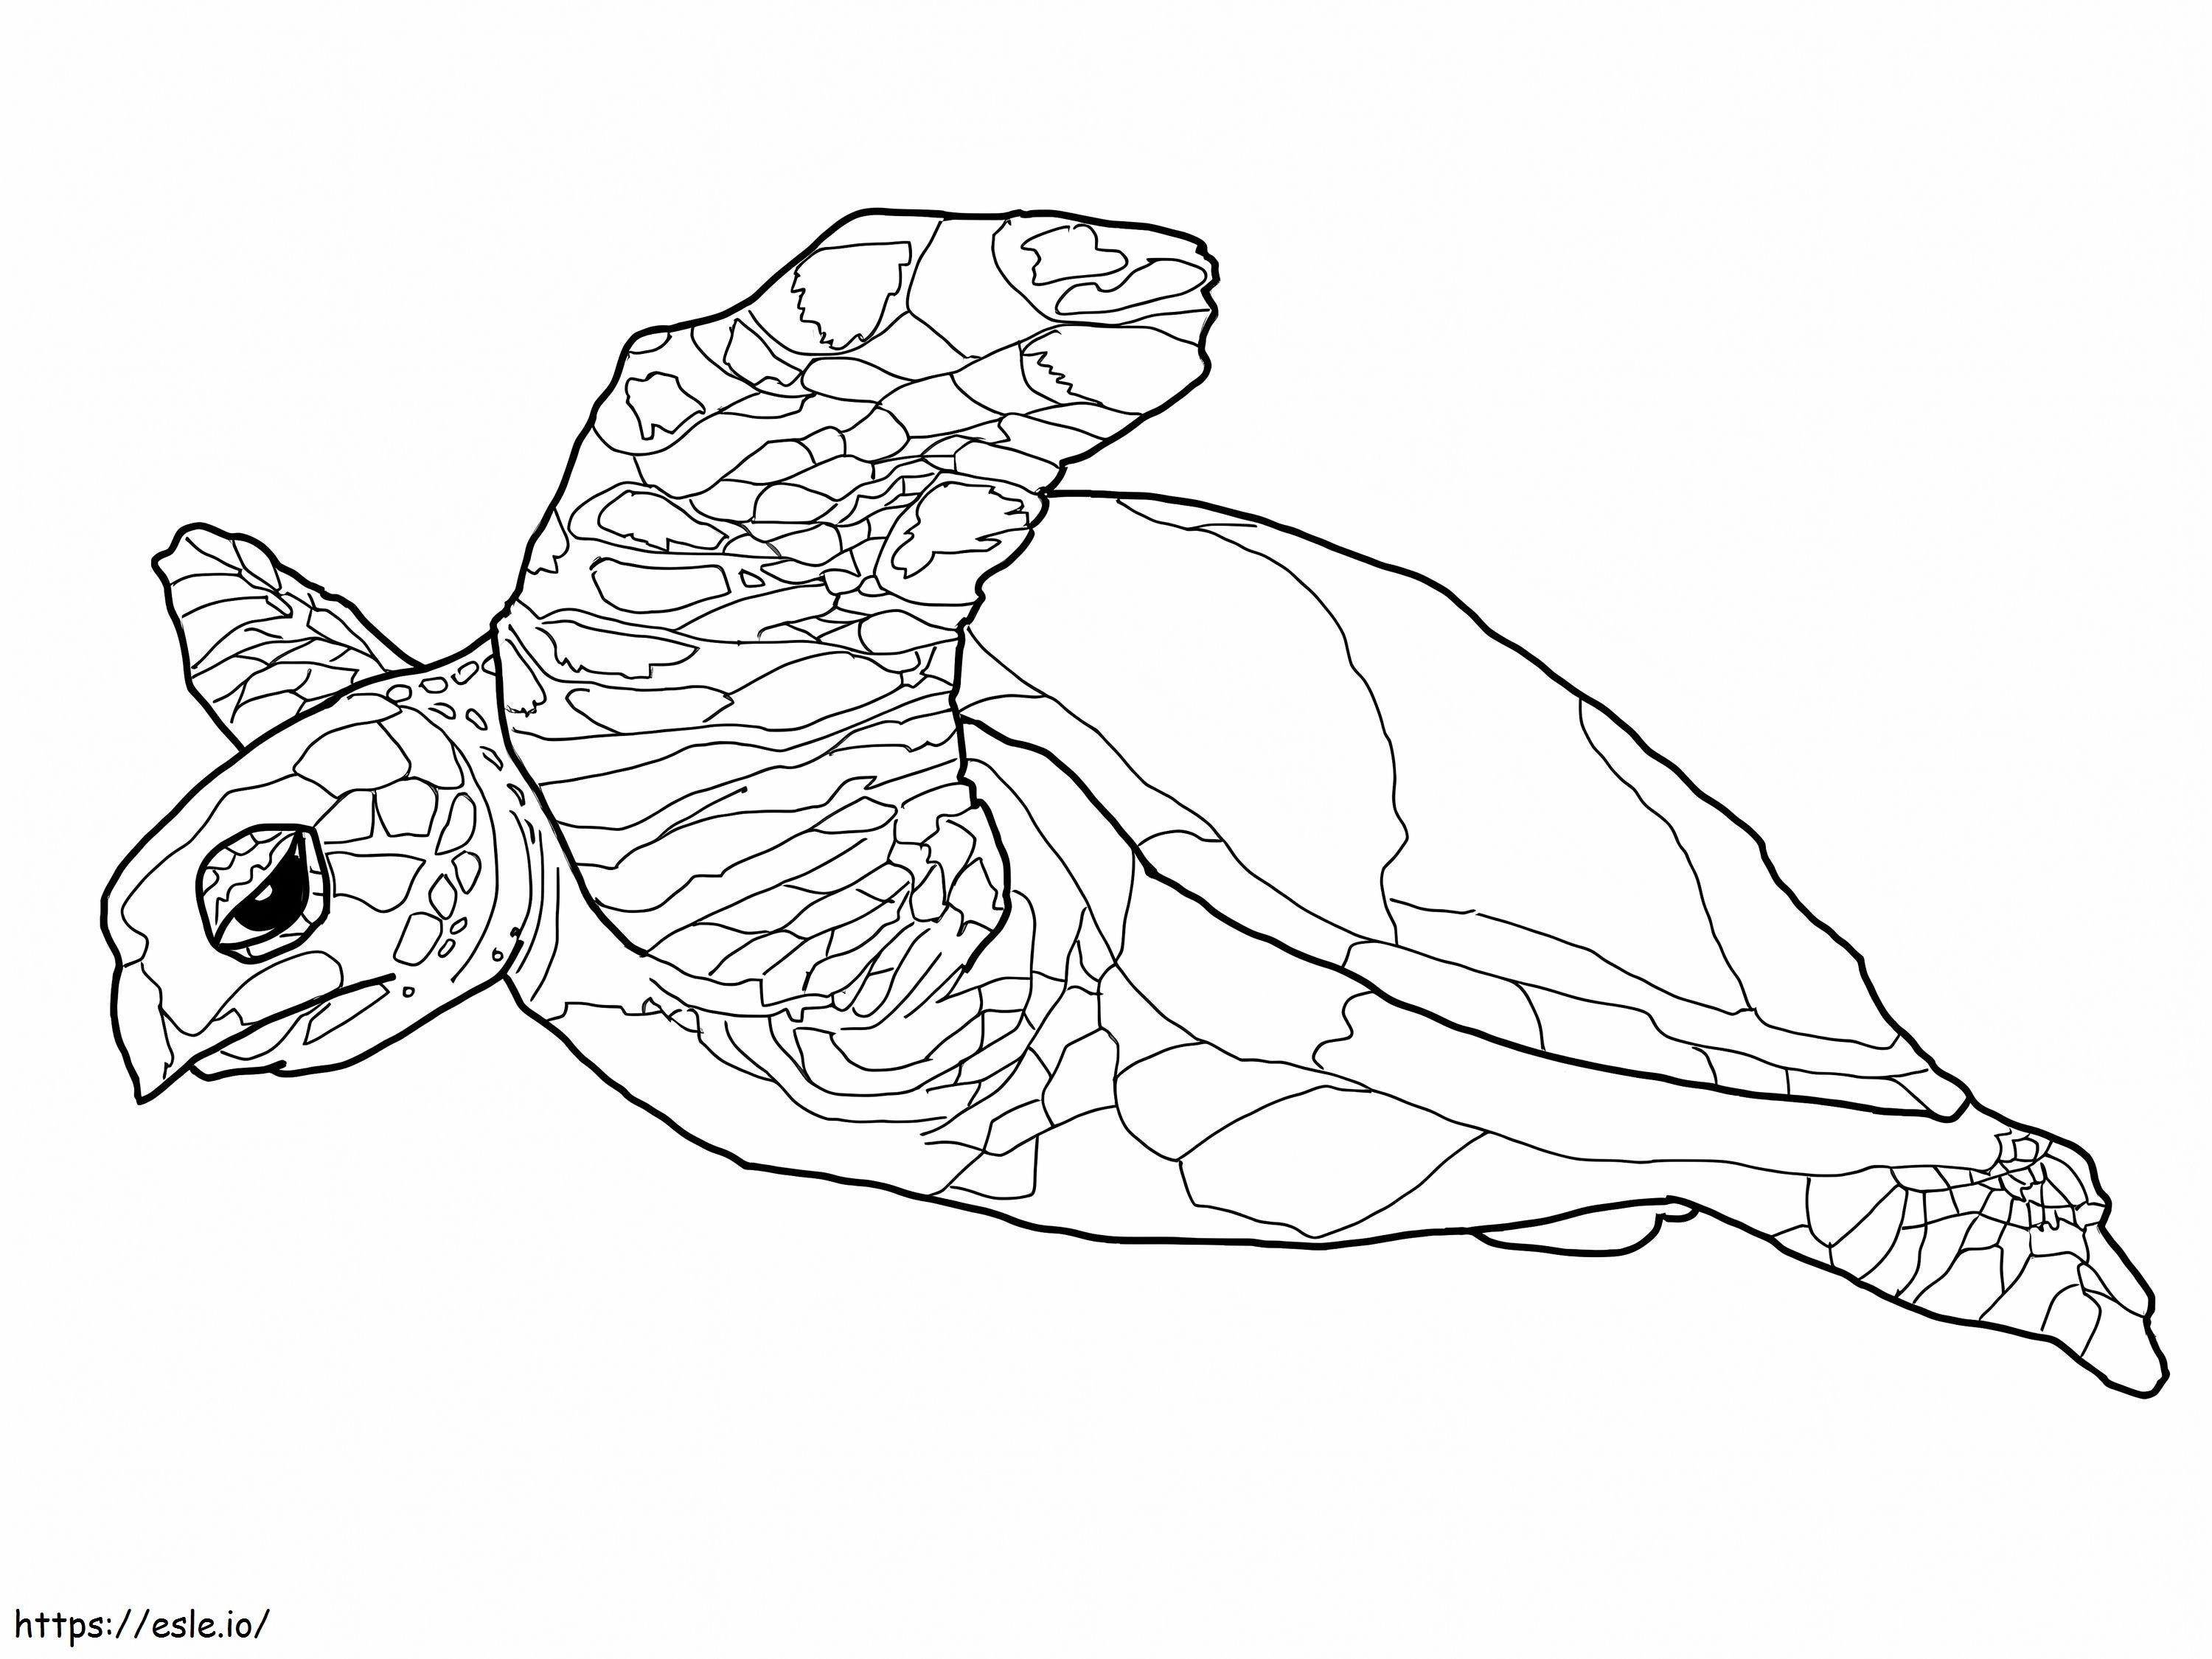 Awesome Turtle coloring page